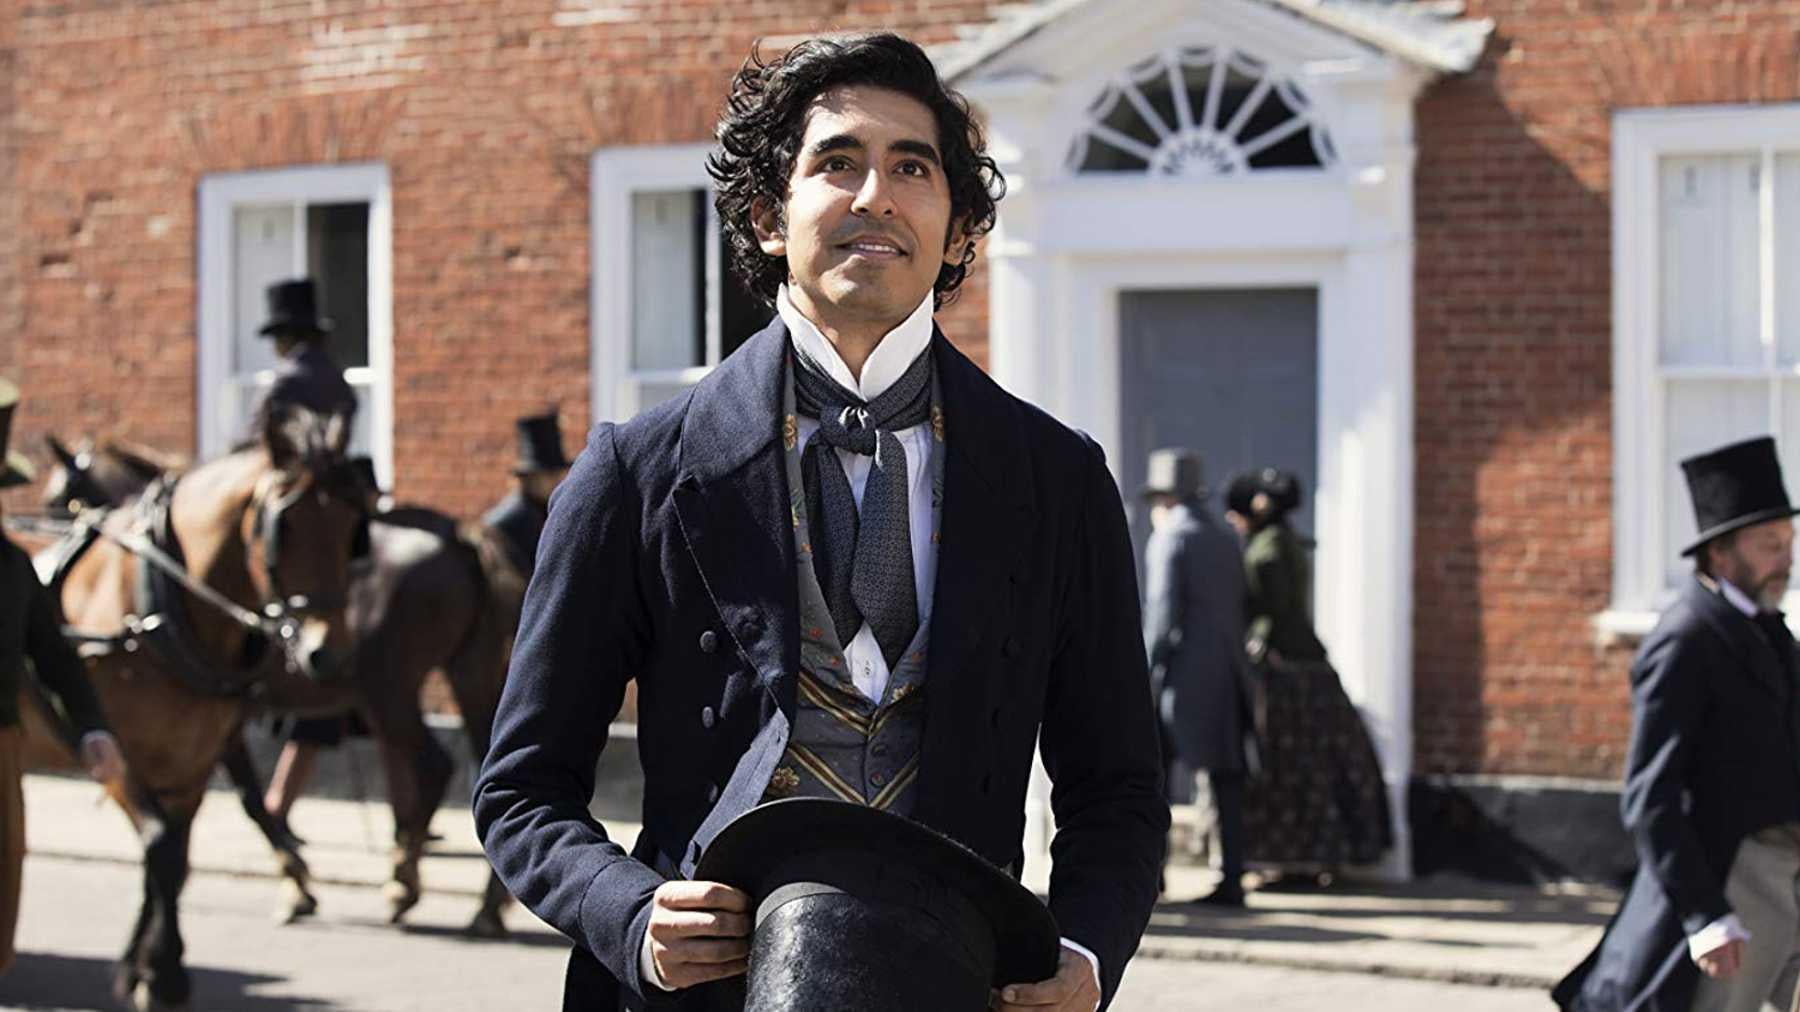 What the Dickens? Dev Patel in ‘The Personal History of David Copperfield’